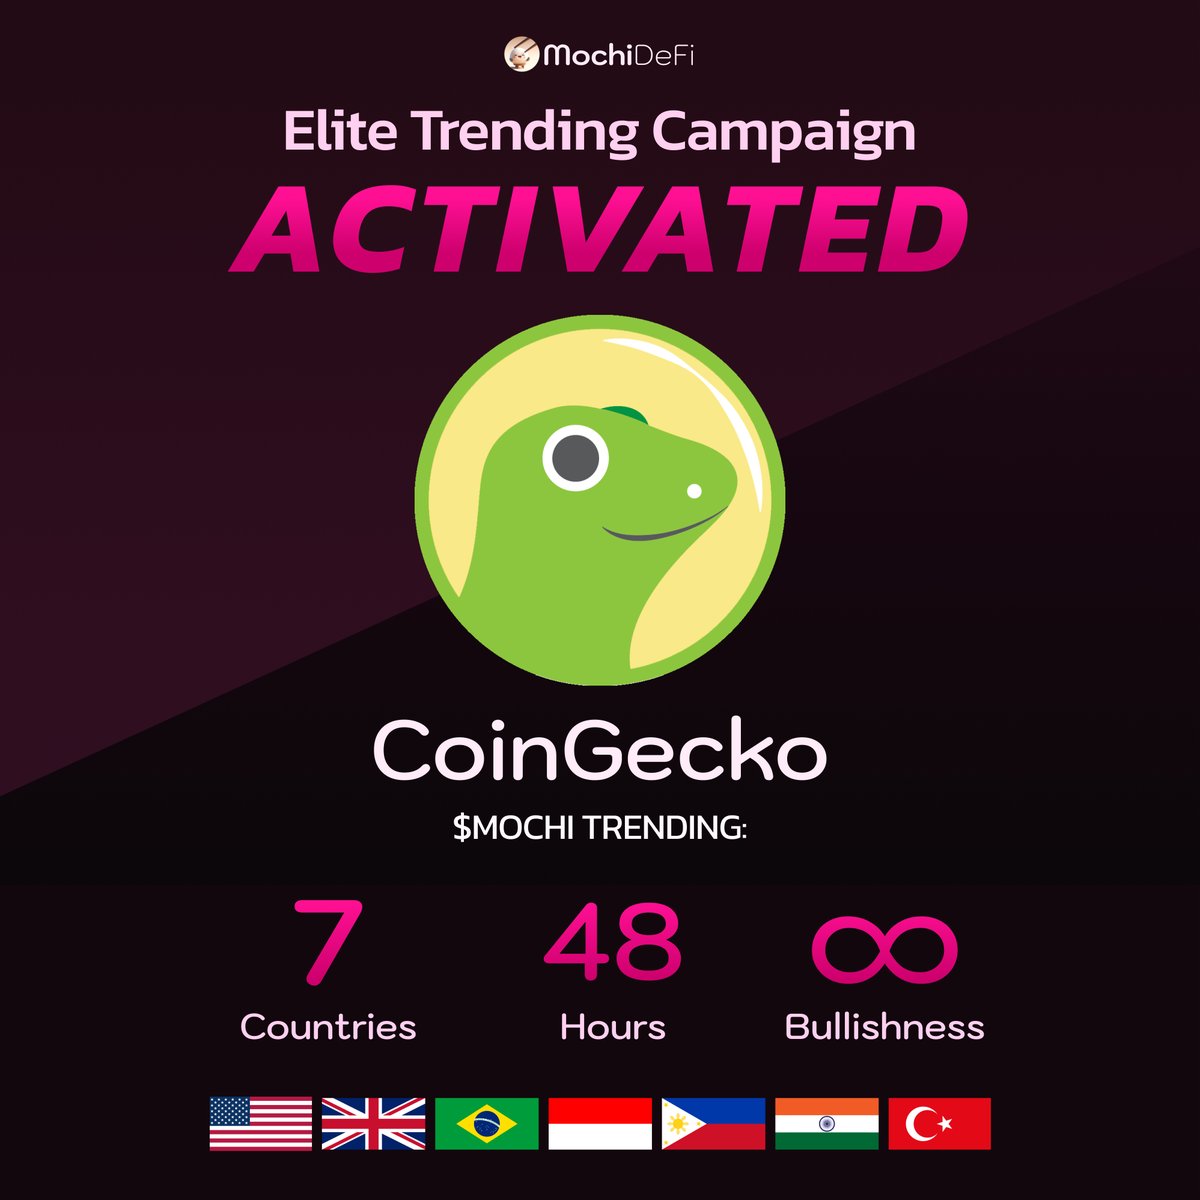 🚨 ELITE TRENDING ACTIVATED ON #CoinGecko 

$MOCHI will be a top trending coin on Coingecko for the next 48hrs in 7 countries.

Full details: t.me/Mochi_DeFi/884…

It's #GOTIME. Beast-mode kicking up a notch. Bullish tuesday ahead with non-stop marketing and community…